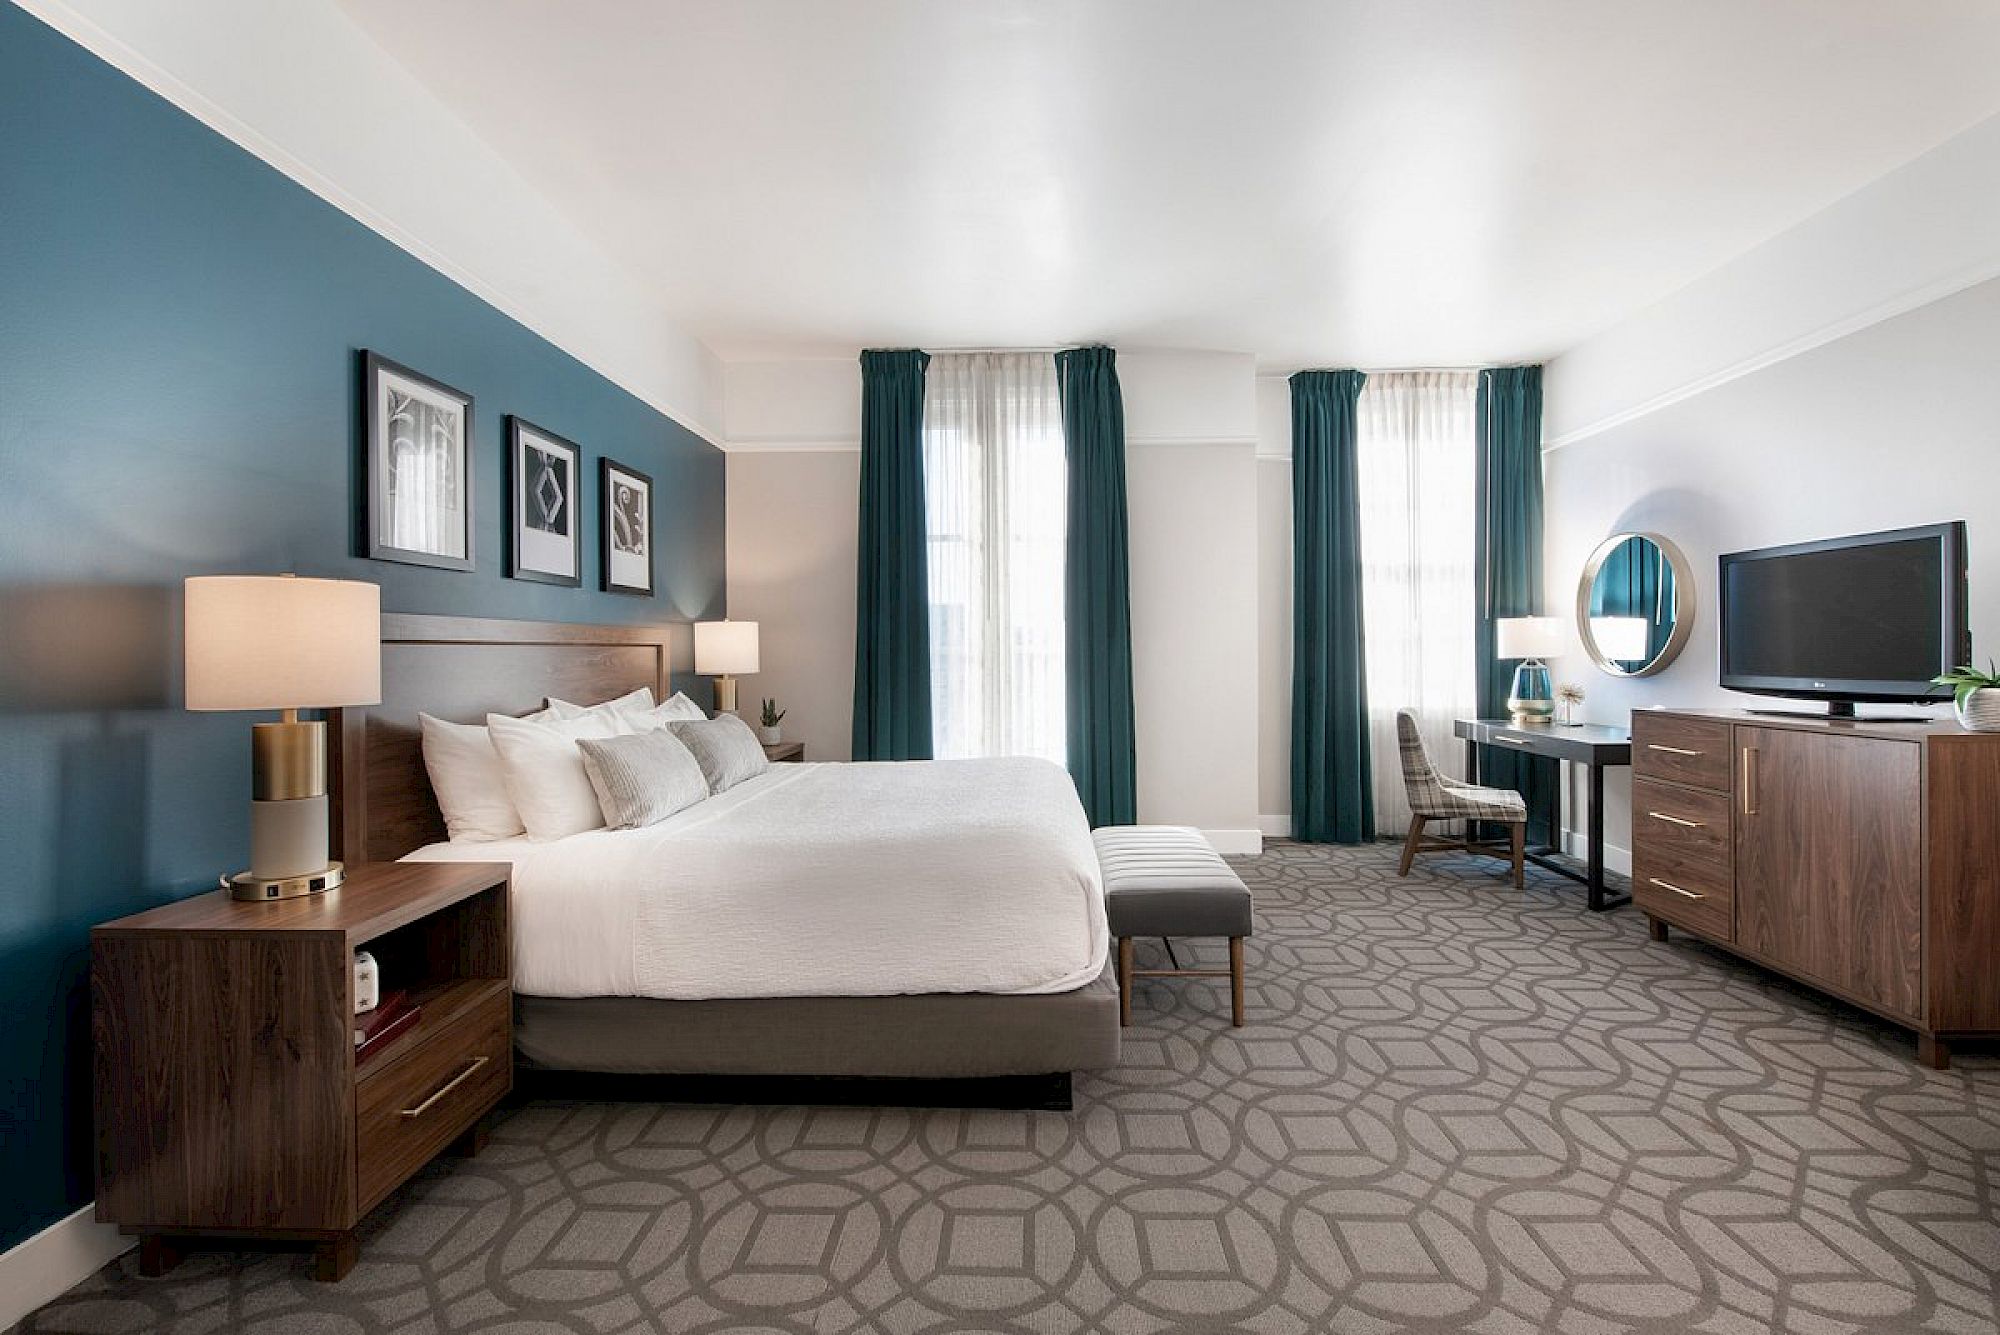 Magnolia Hotel Room with king size bed blue accent wall